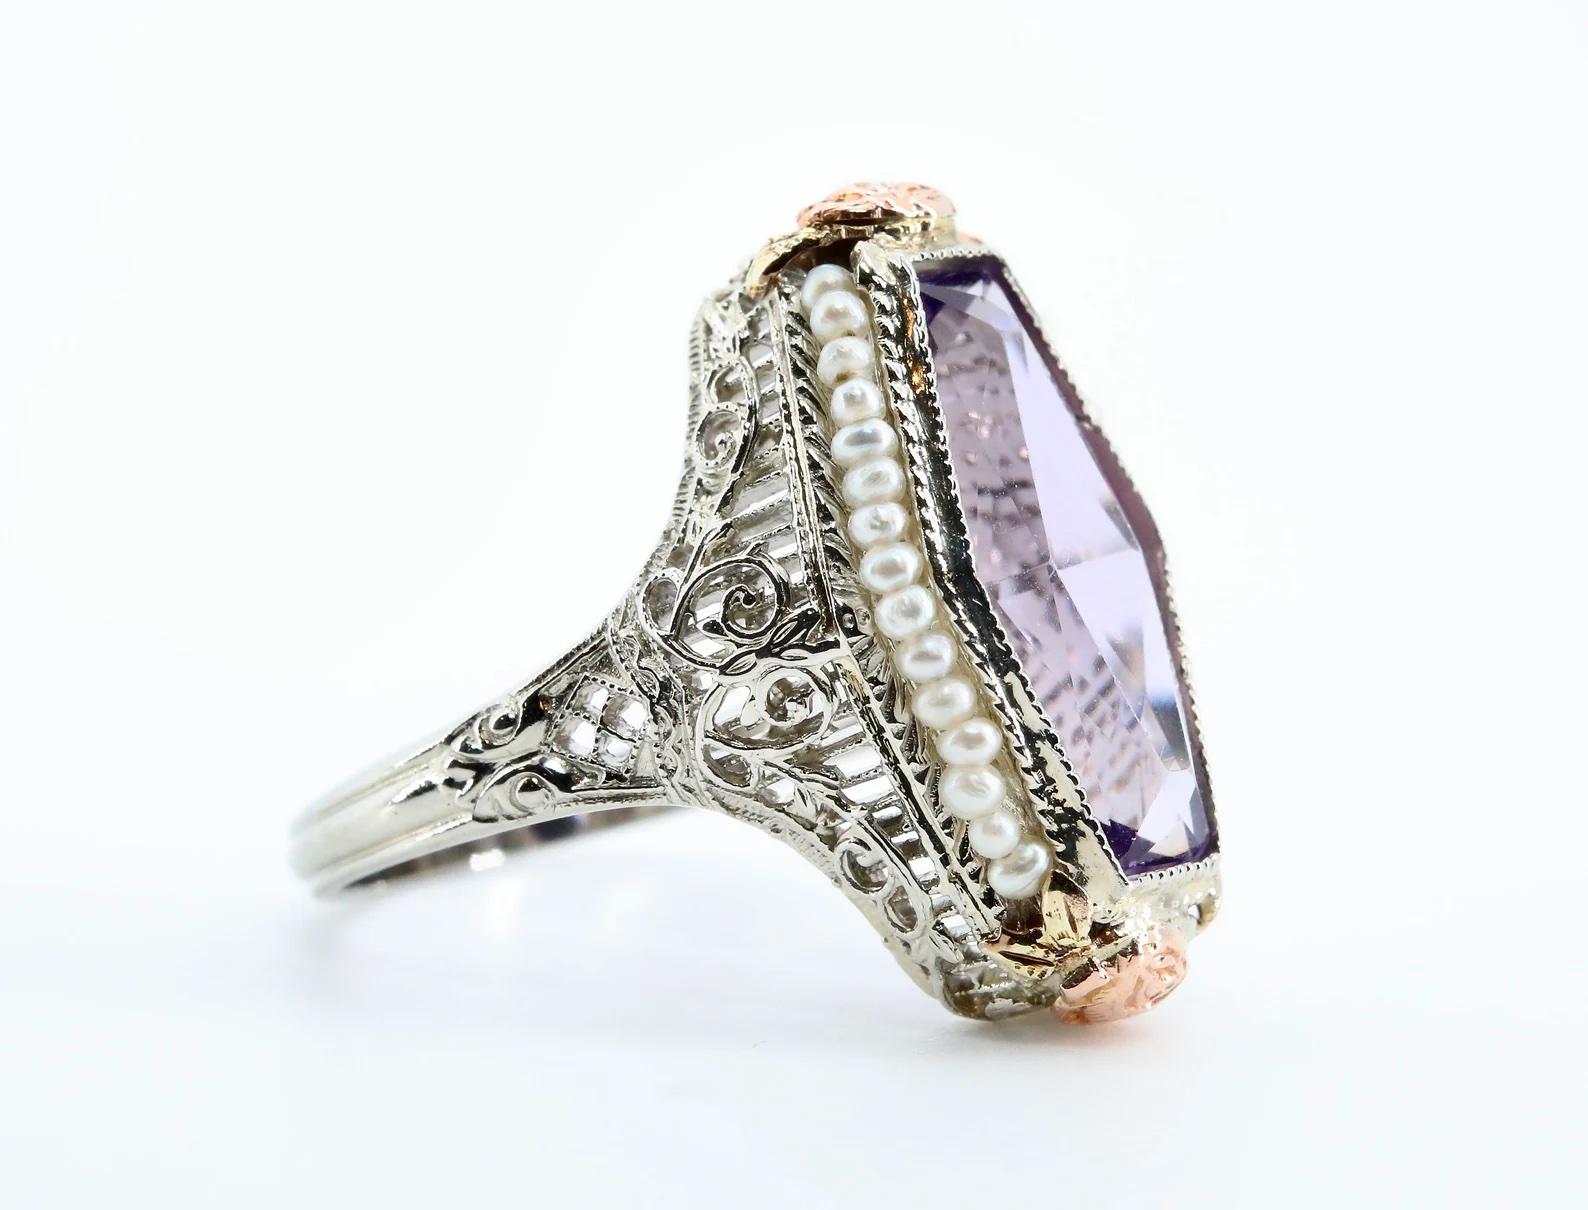 An original Art Deco period amethyst, and seed pearl filigree ring in 14 Karat white gold. Centered by an elongated hexagon amethyst set in a miligrained bezel setting. Framing the amethyst are natural seed pearls strung on a gold wire. Accenting